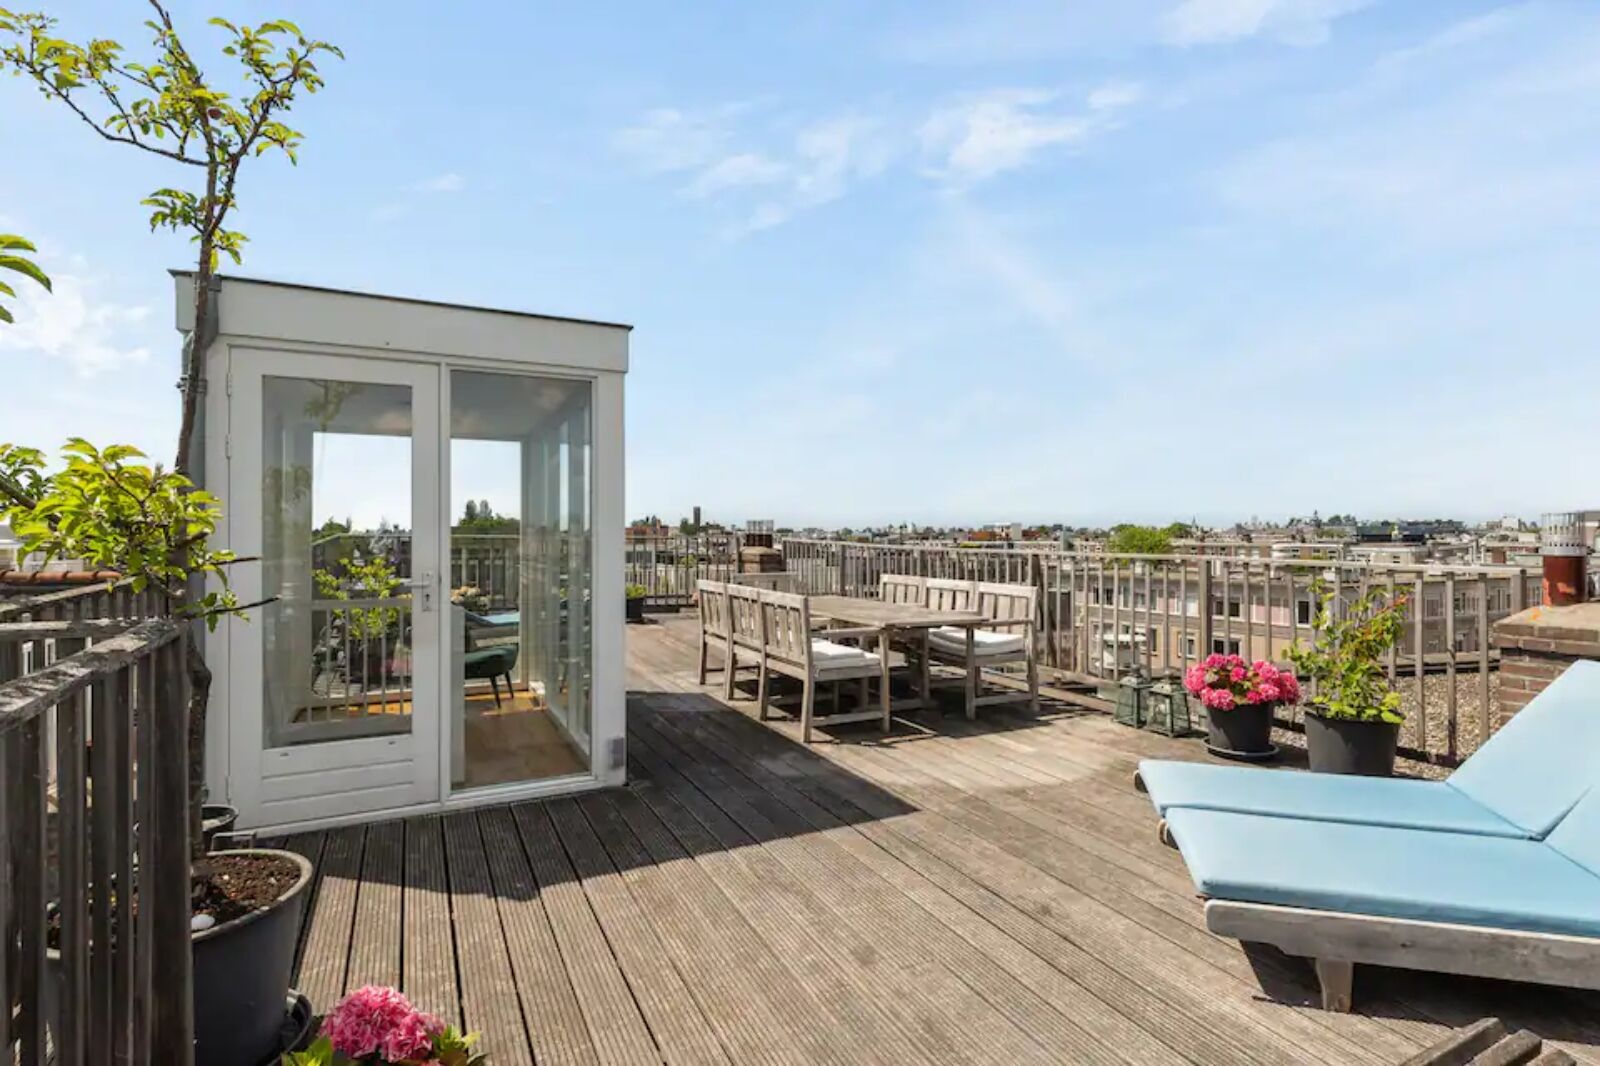 Conservatory on rooftop in one of the best amsterdam airbnbs for a bachelor party